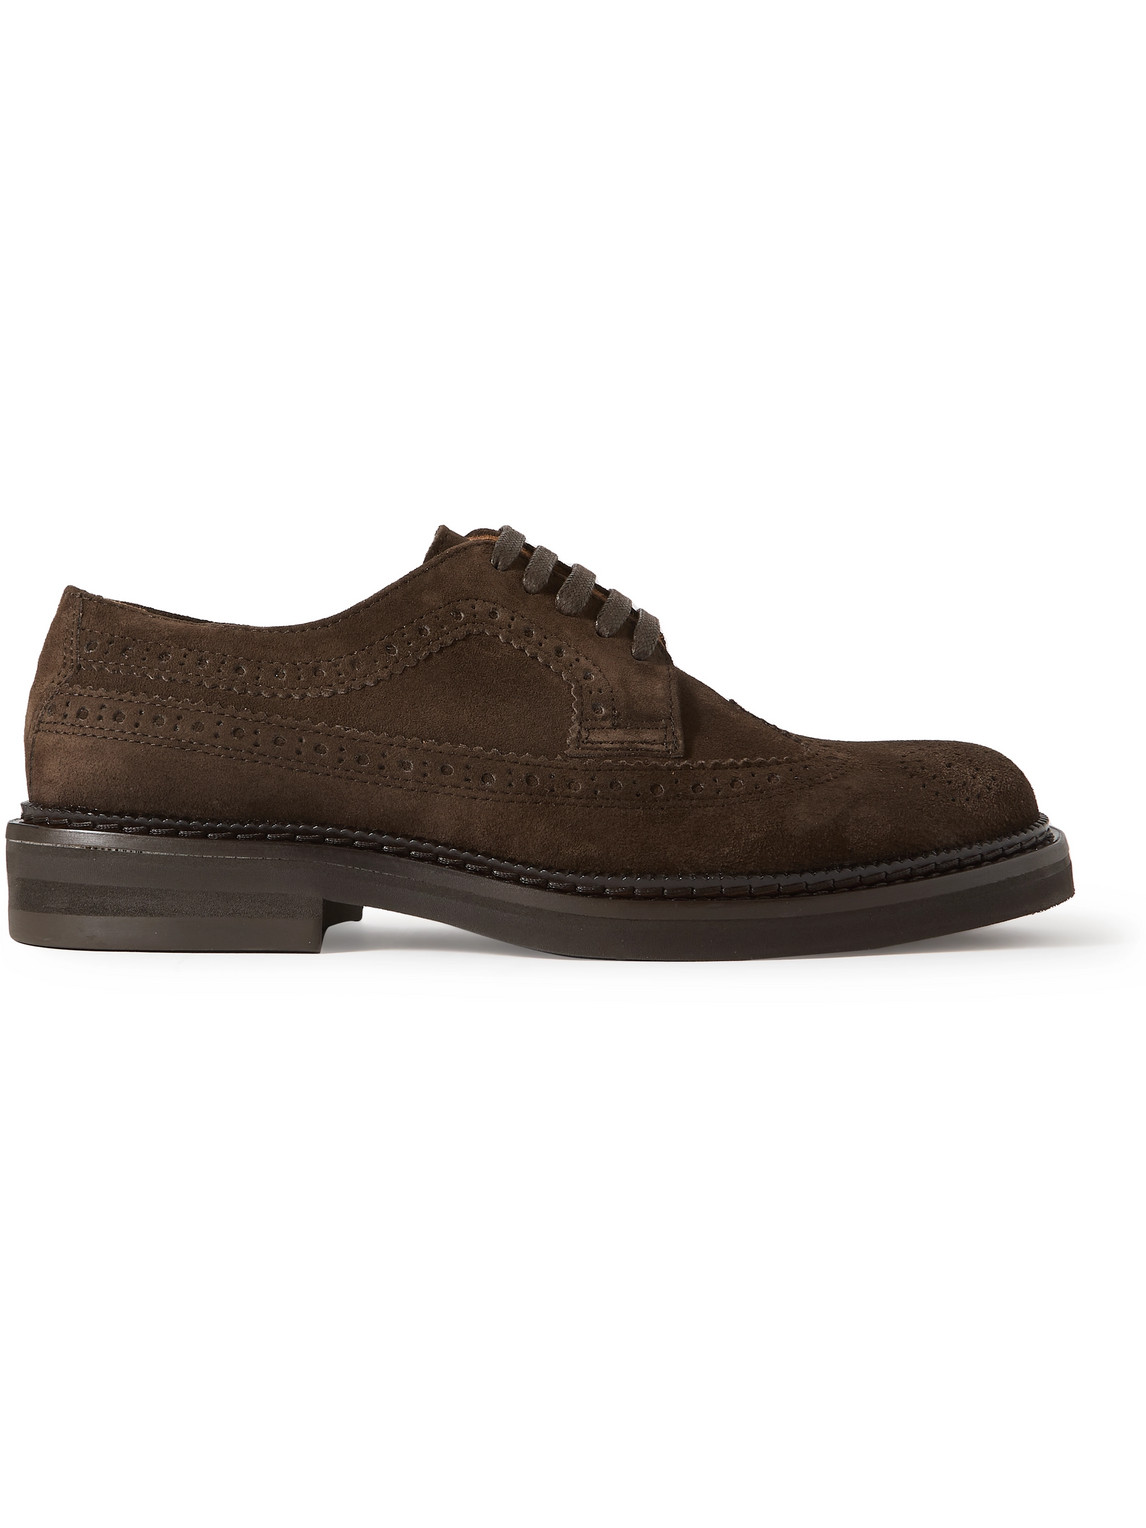 Jacques Eton Regenerated Suede by evolo® Brogues